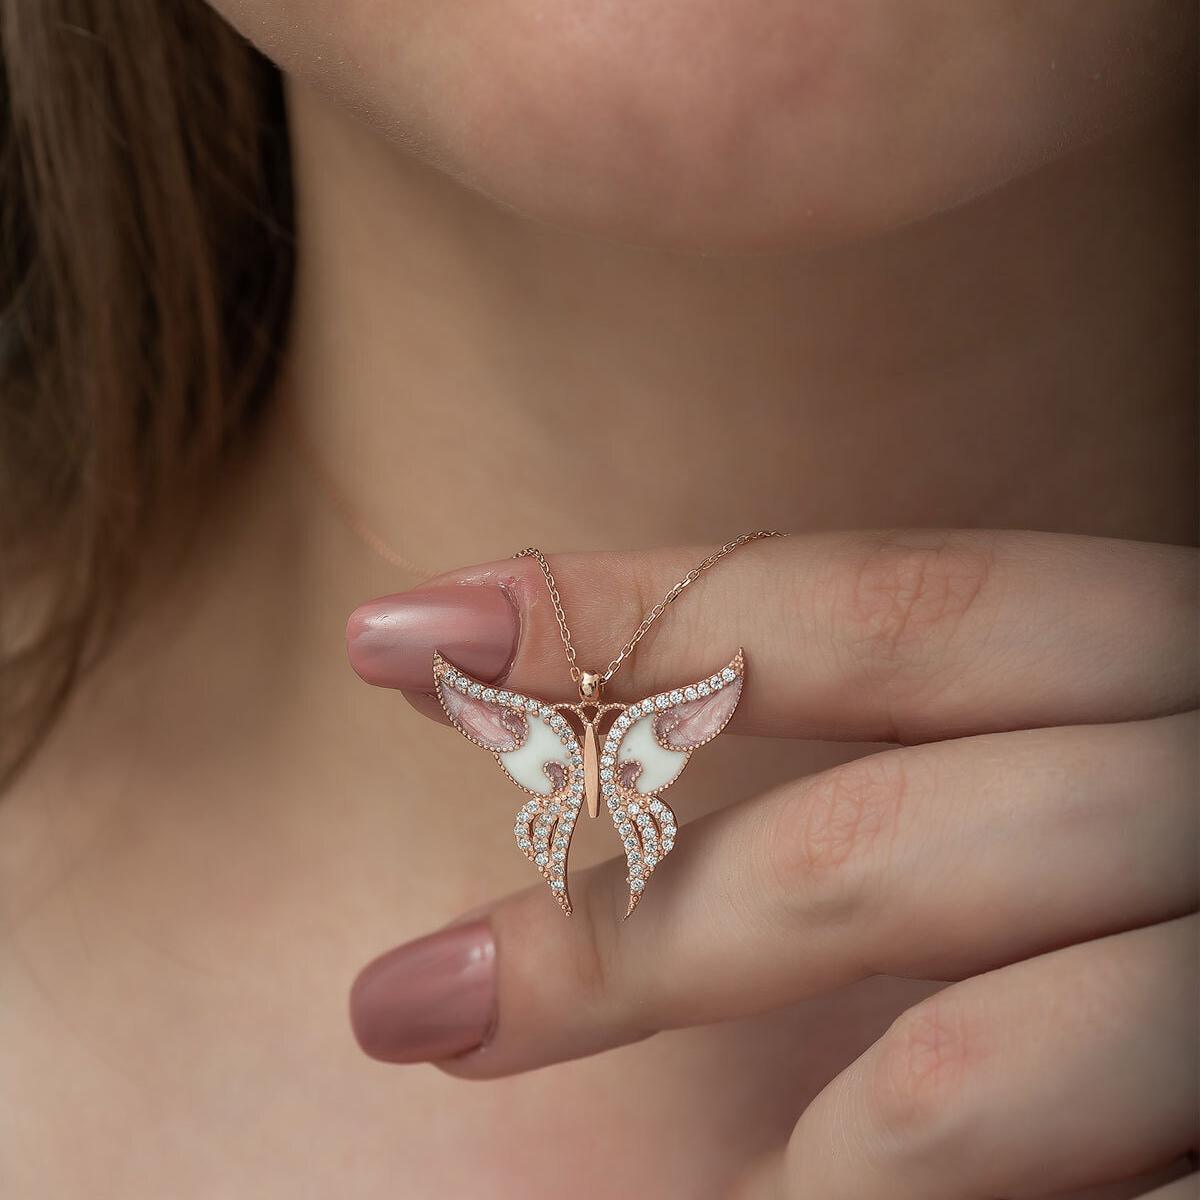 White Butterfly Diamond Necklace • Butterfly Cream Pendant Necklace - Trending Silver Gifts